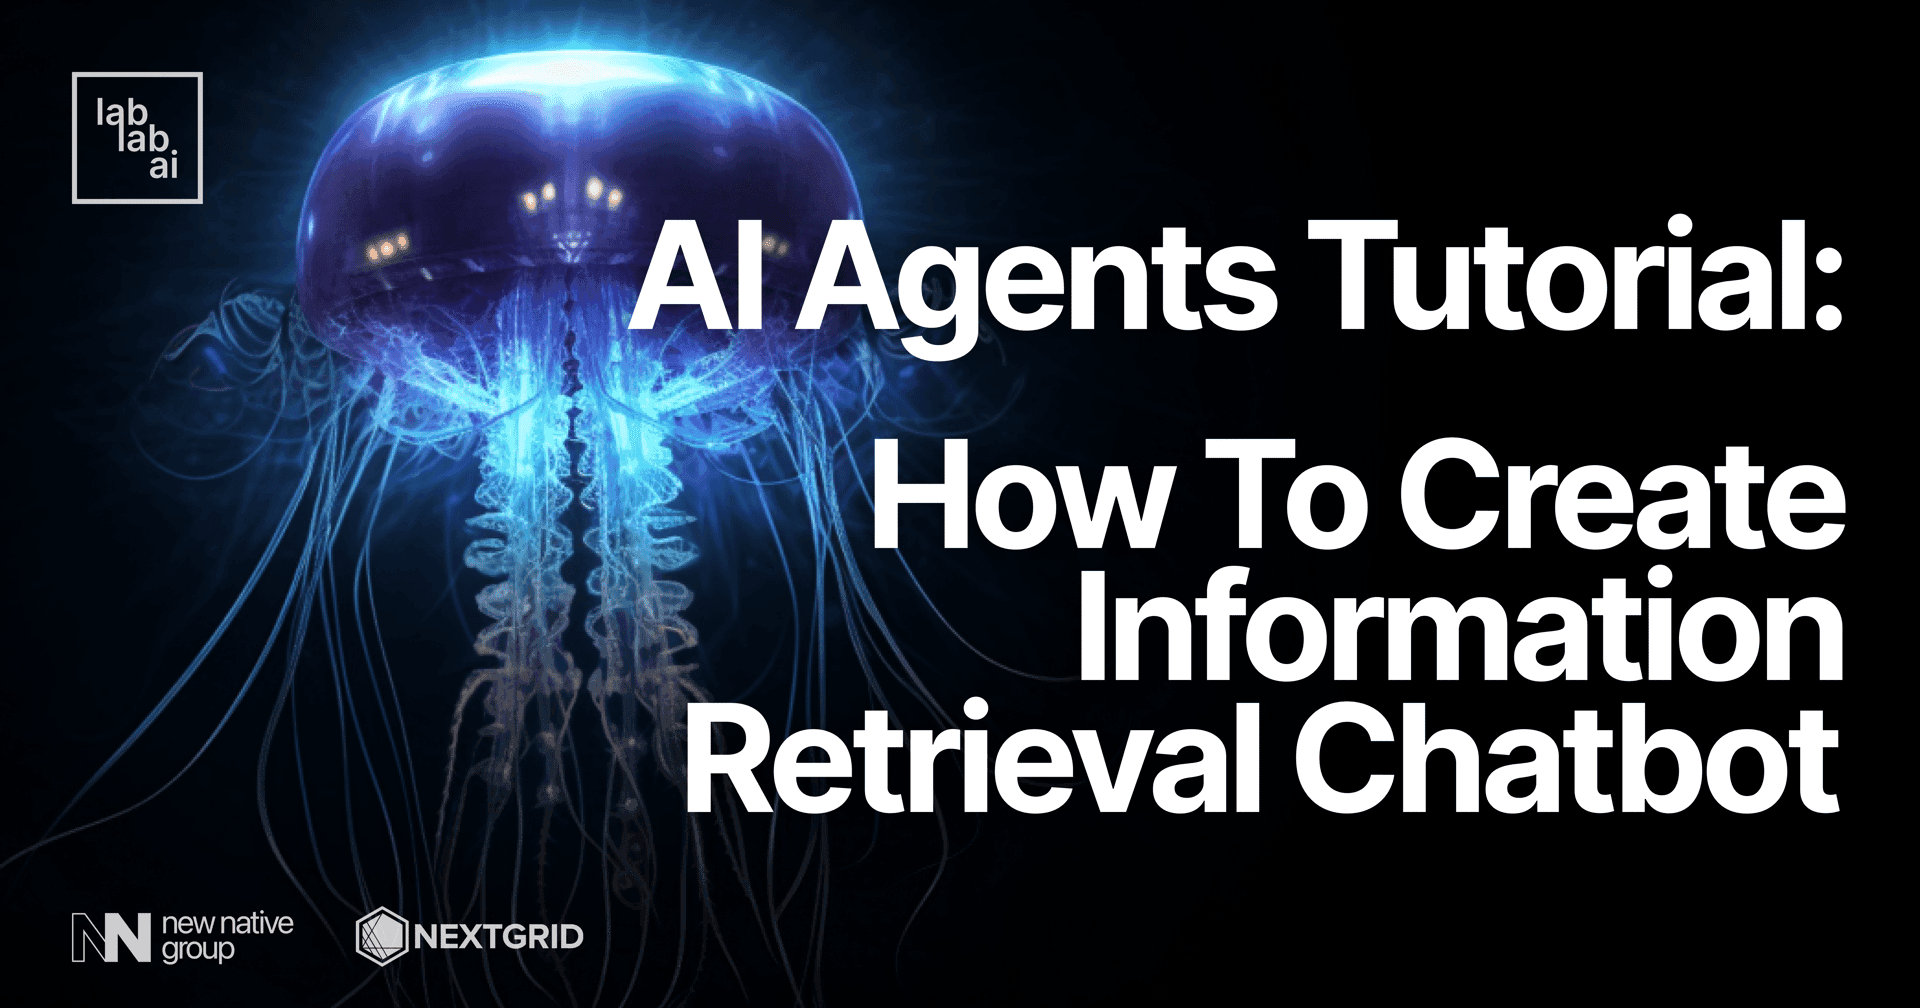 AI Agents tutorial: How to create information retrieval Chatbot